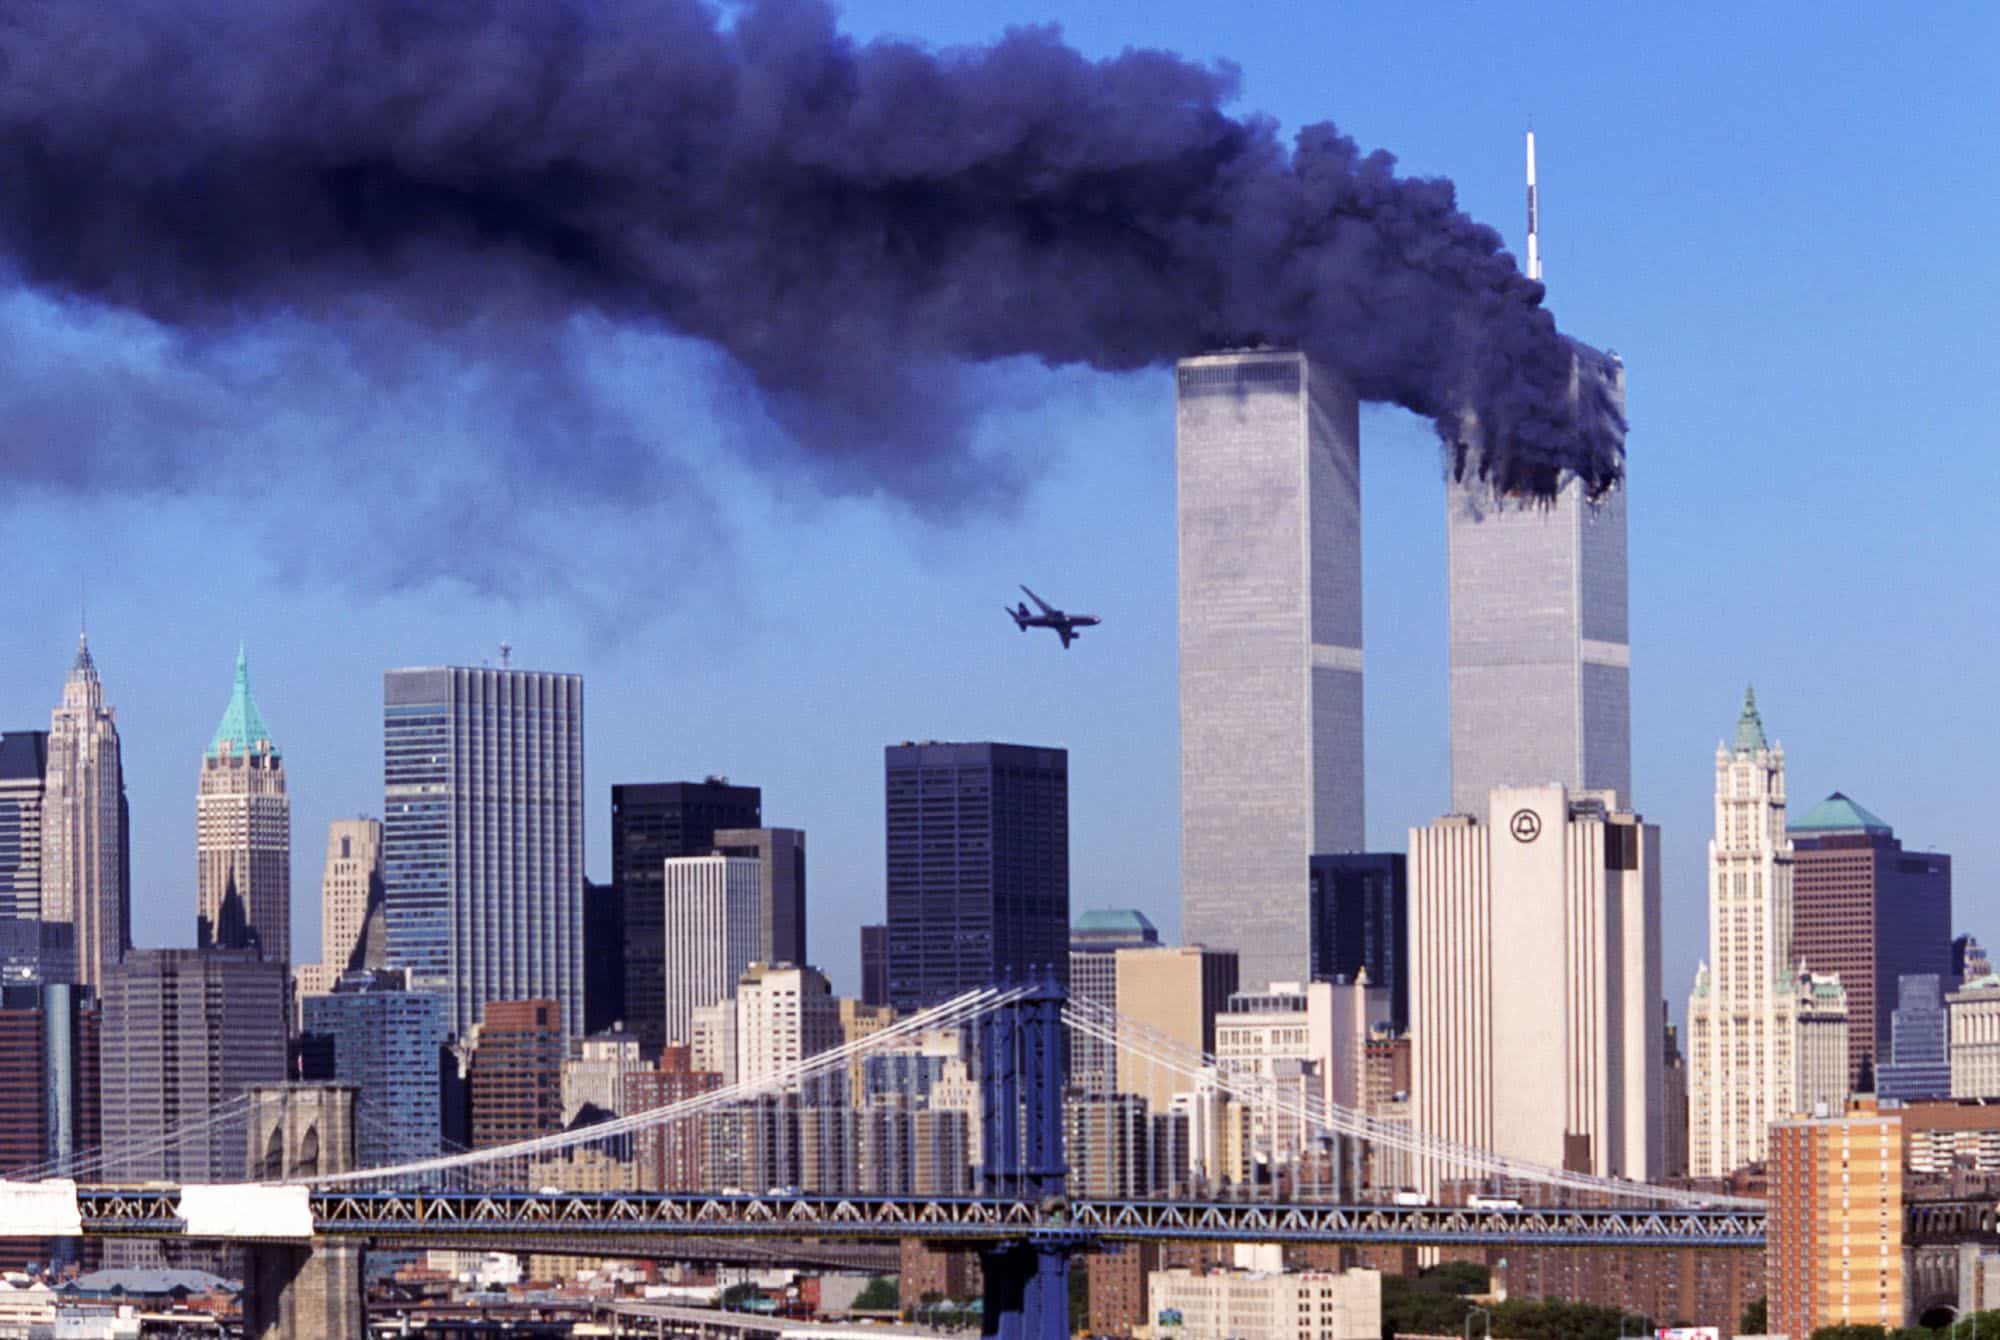 9/11: Attack on the United States